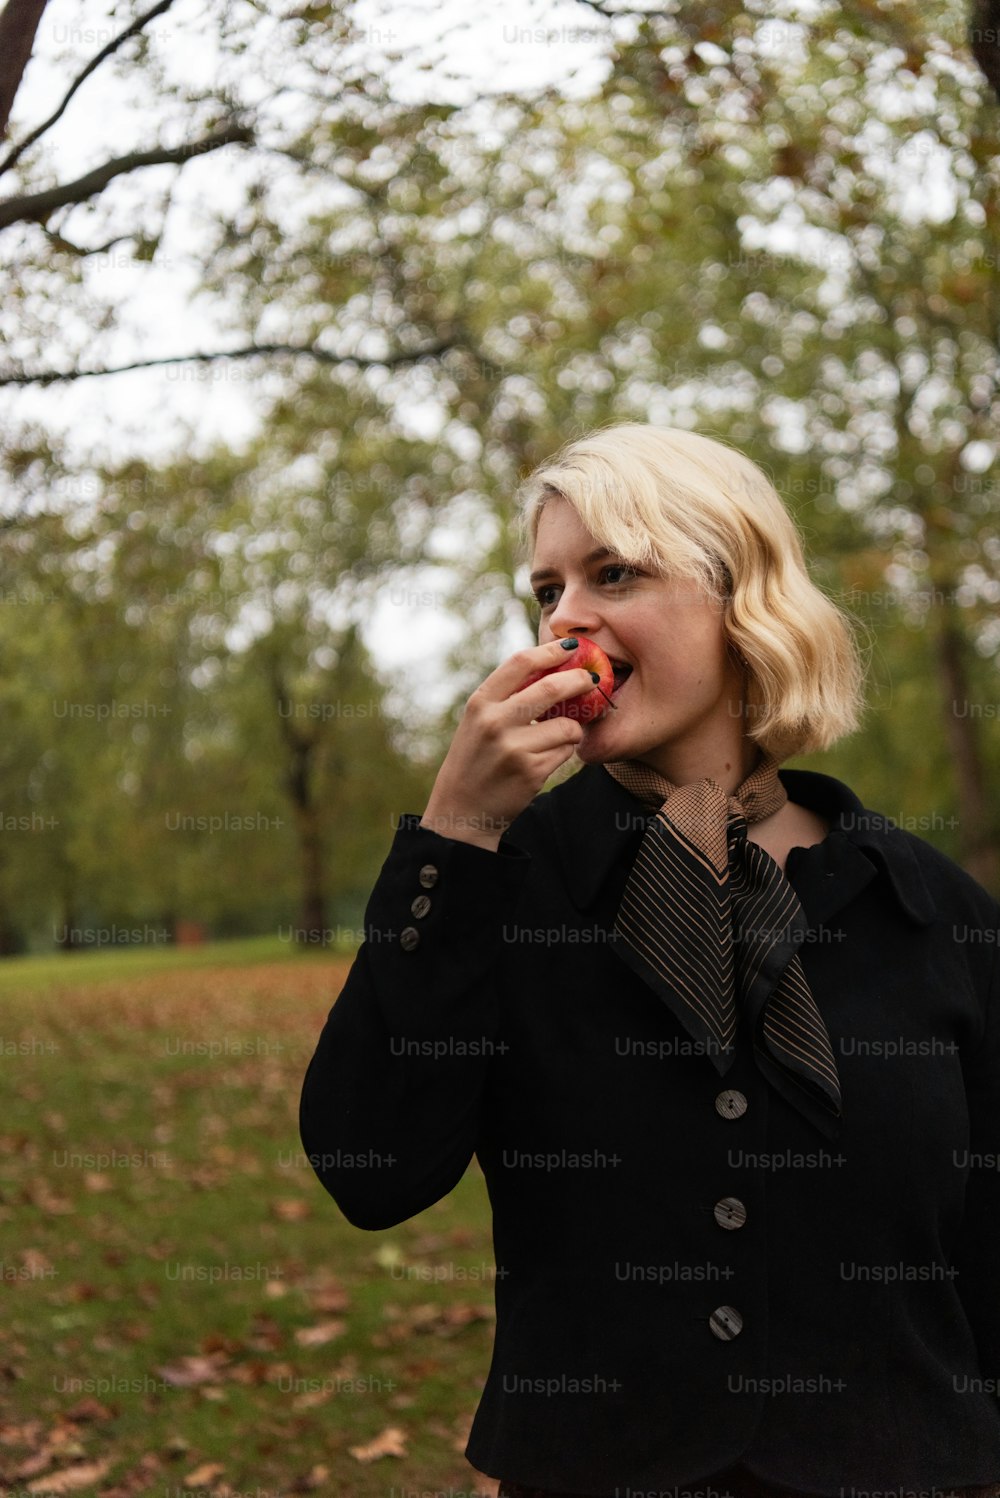 a woman in a black jacket eating an apple